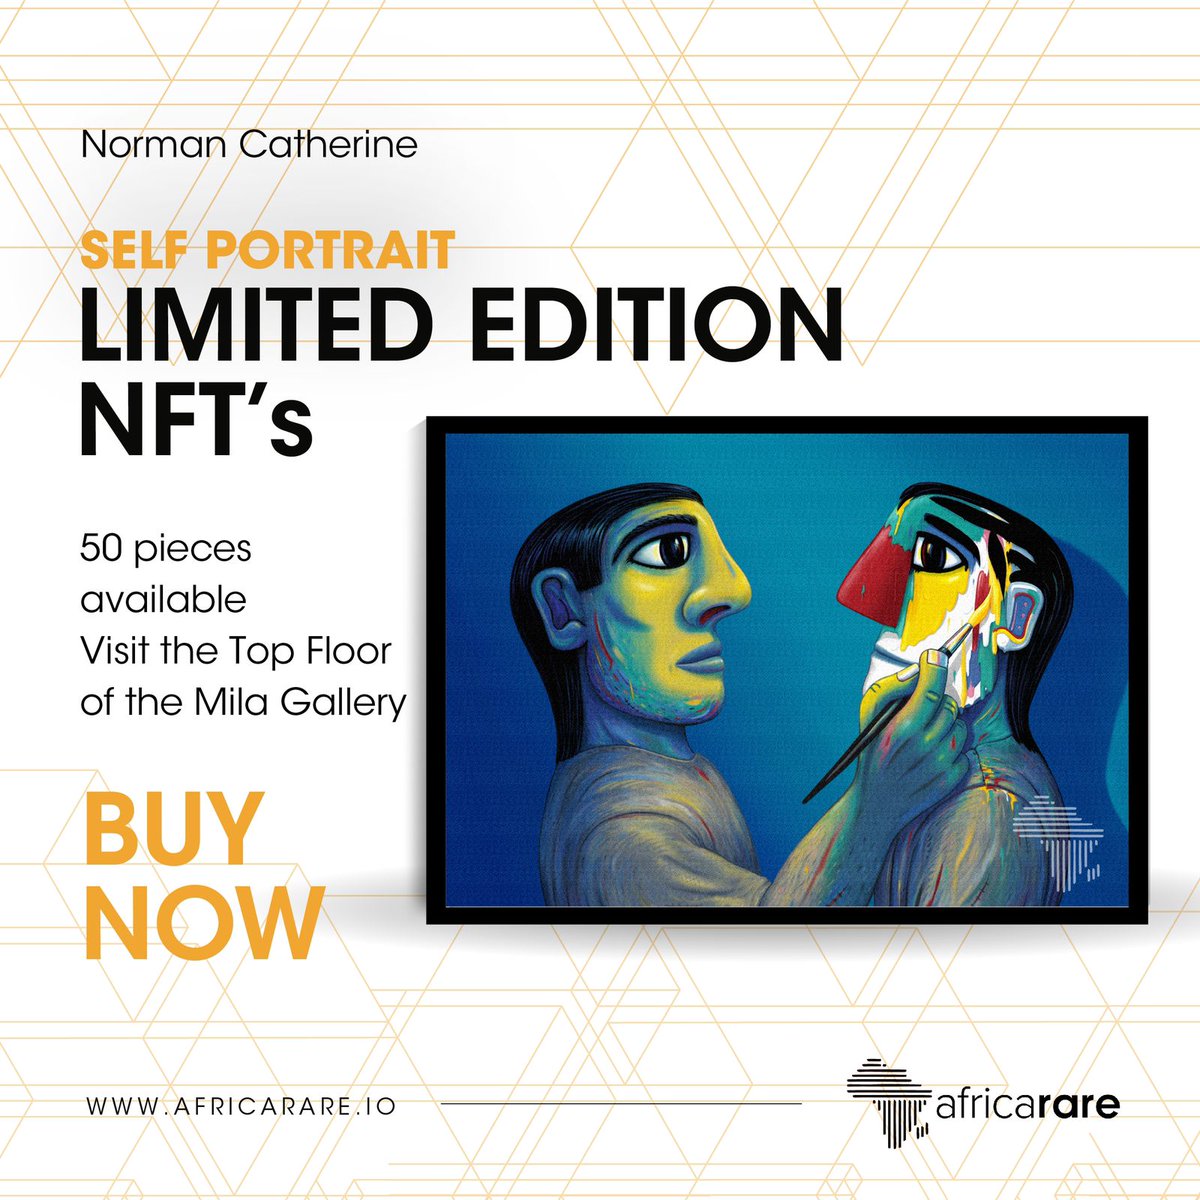 Norman Catherine's 'Self Portrait' NFT is available NOW! Limited to 50 pieces at 0.2ETH.  opensea.io/collection/nor…

#ubuntuland #metaverse #futureproofAfrica